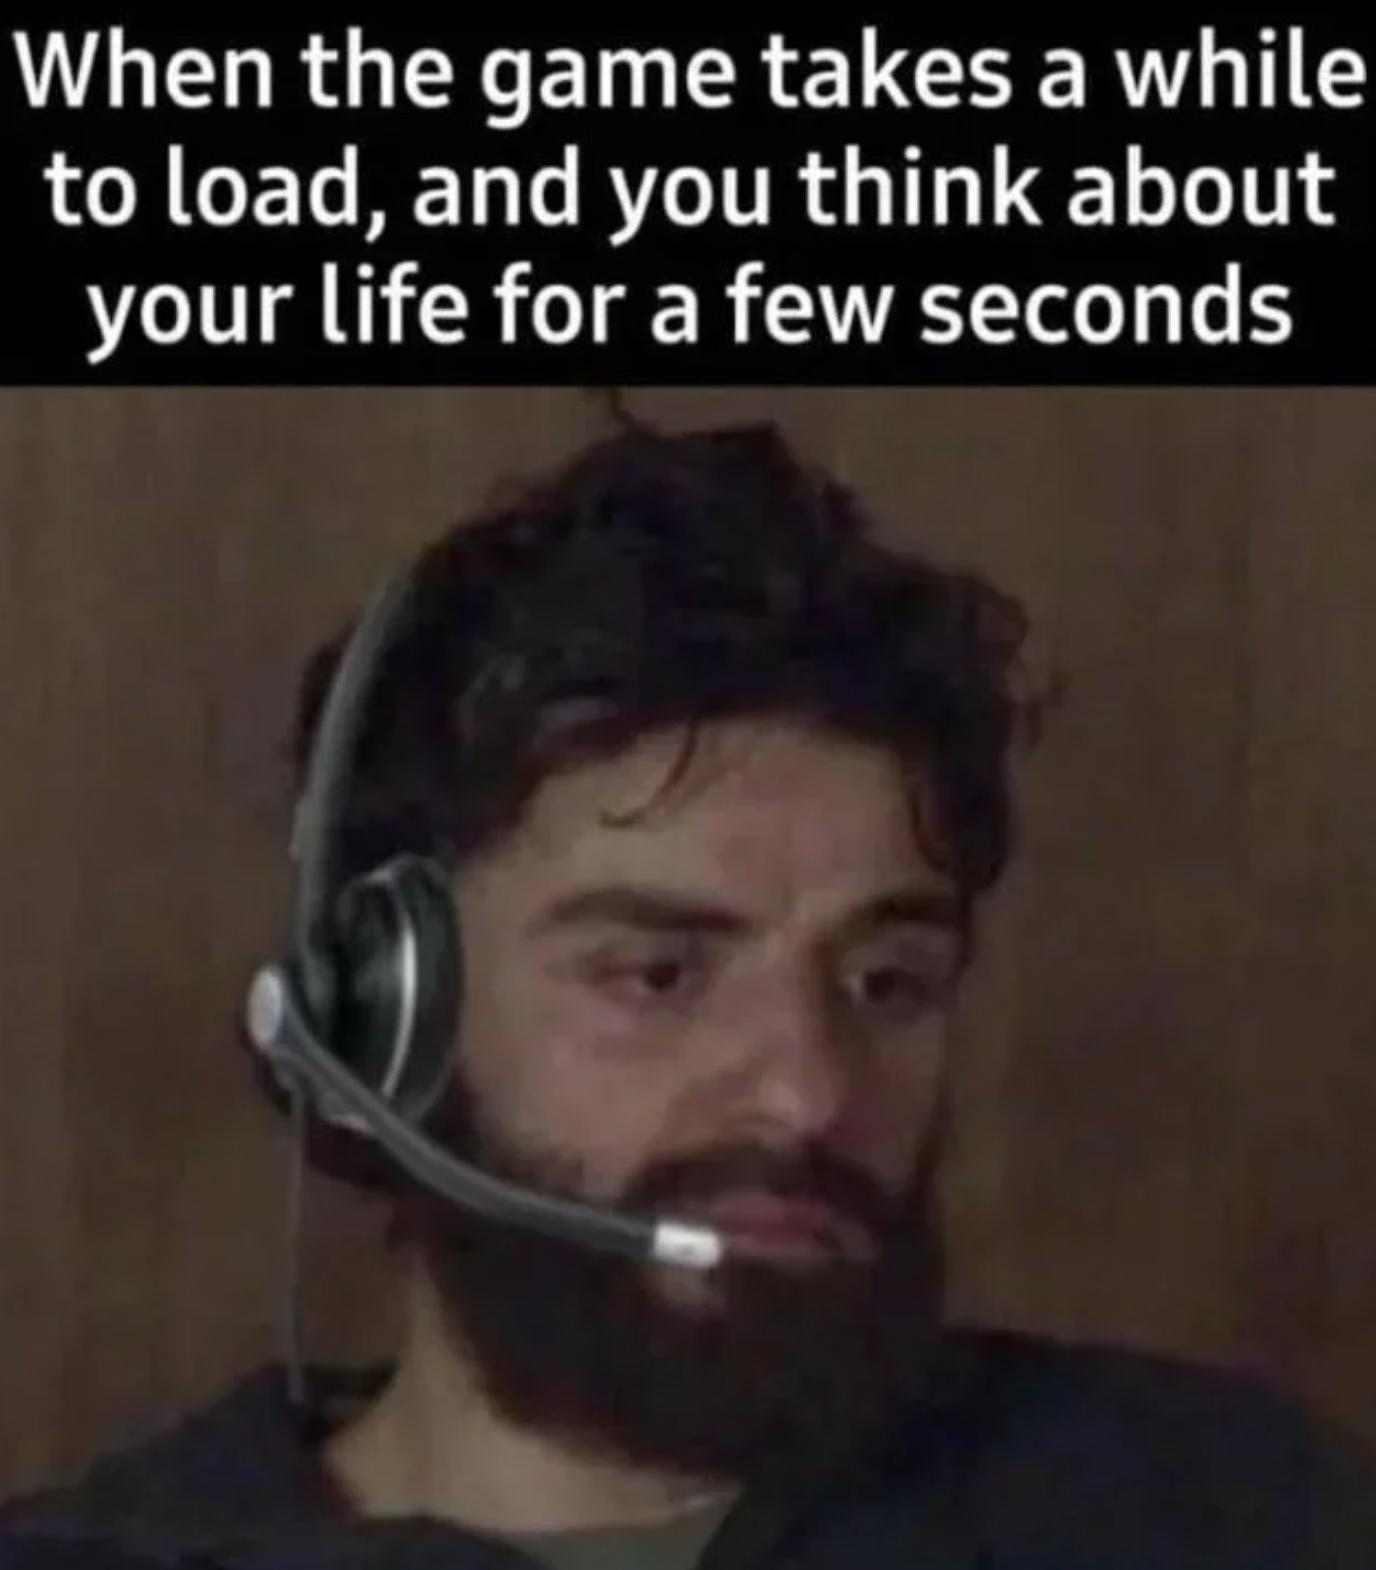 funny gaming memes - beard - When the game takes a while to load, and you think about your life for a few seconds